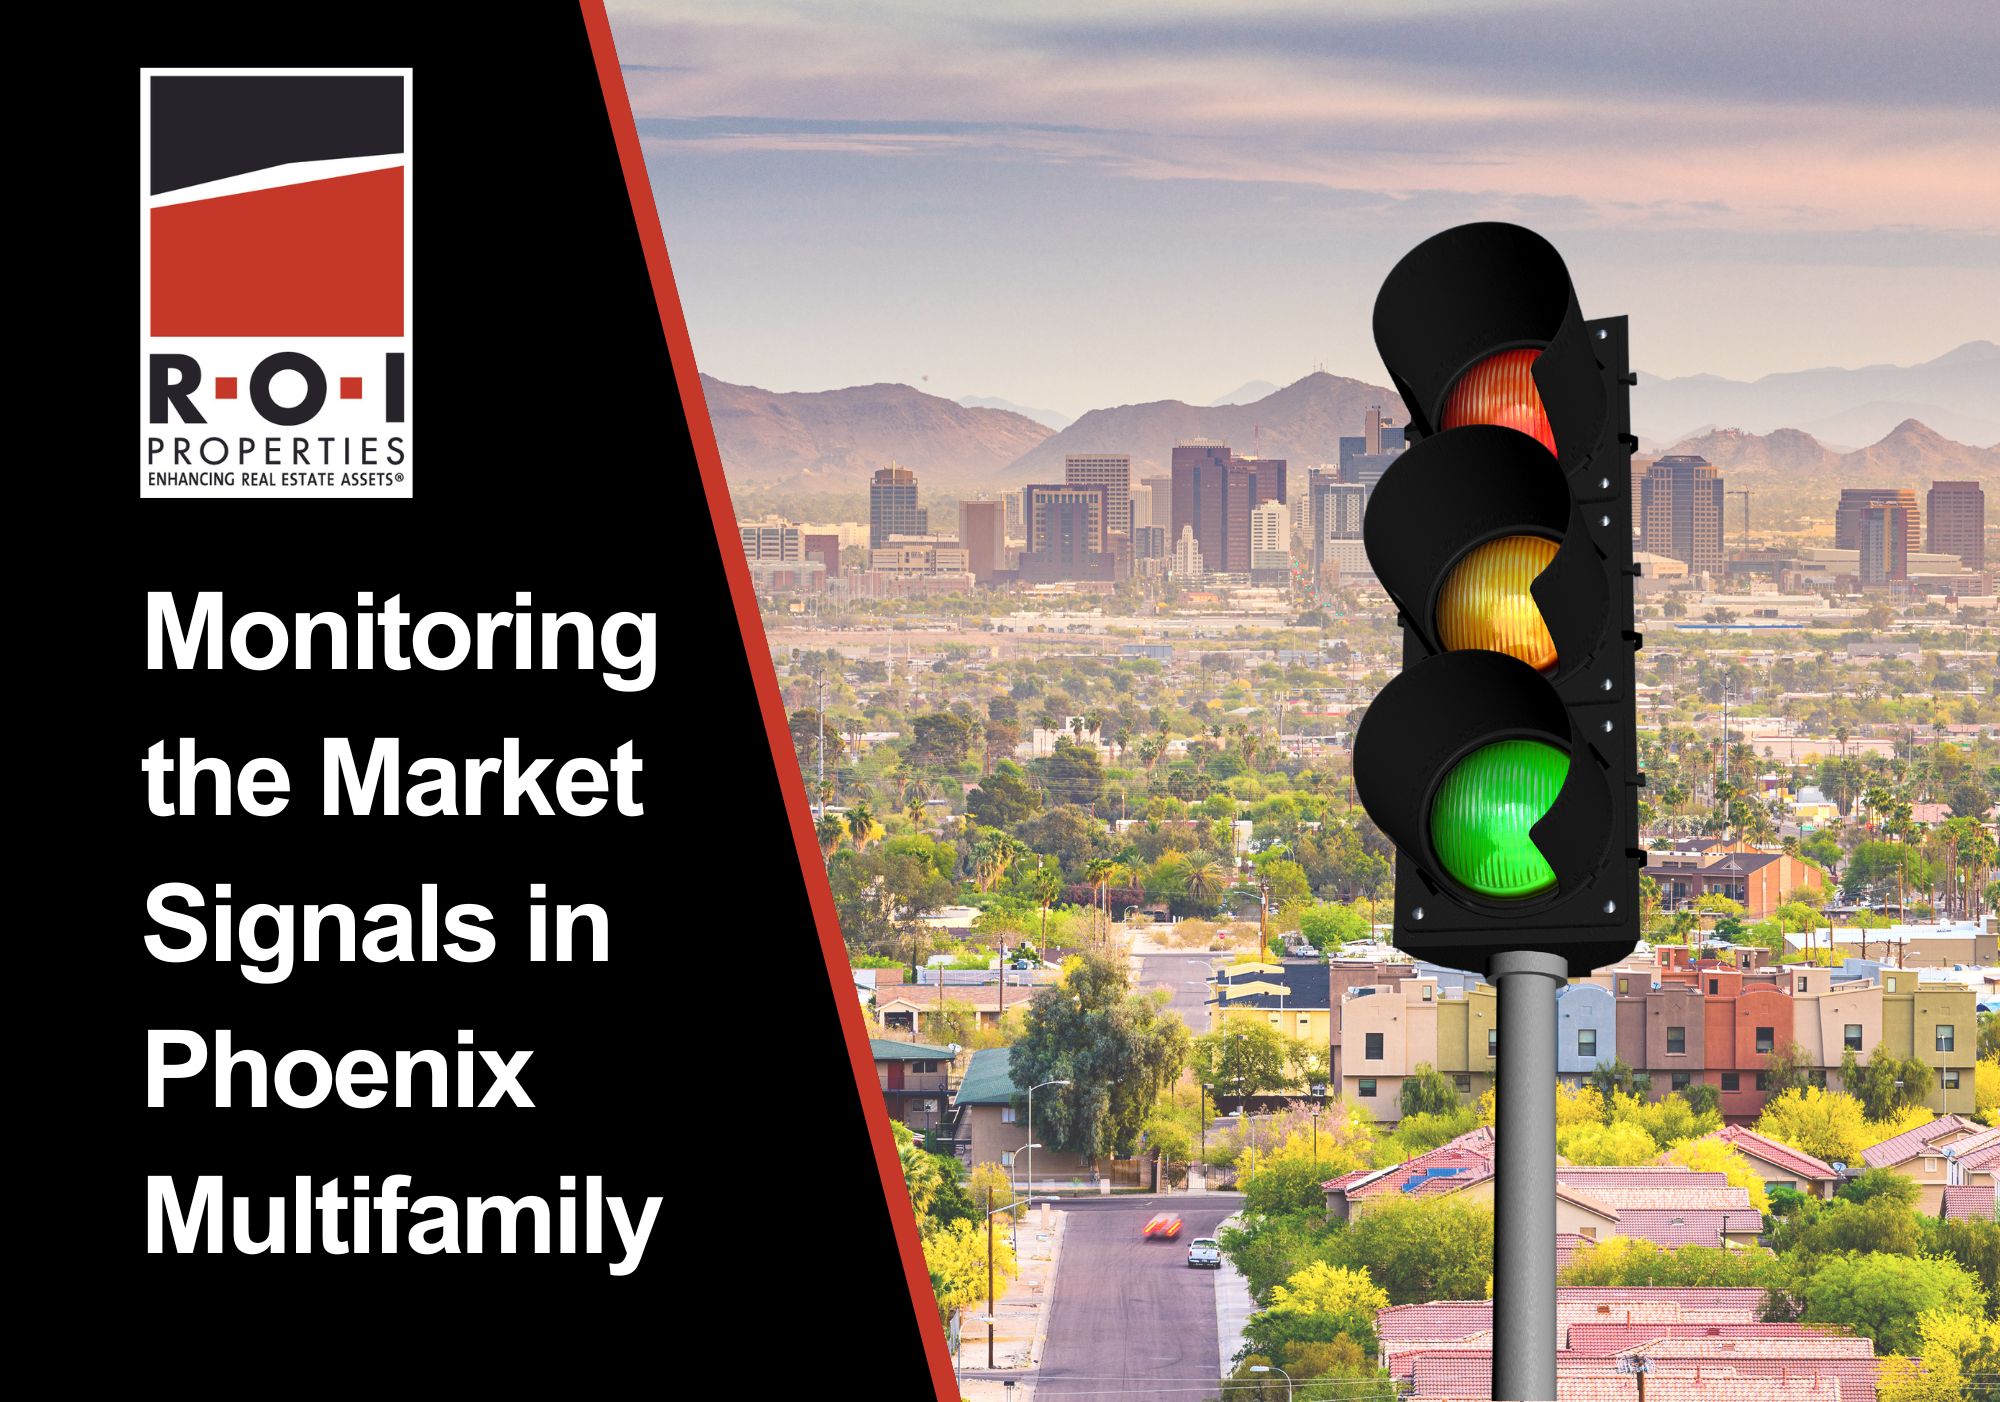 Monitoring the Market Signals in Phoenix Multifamily